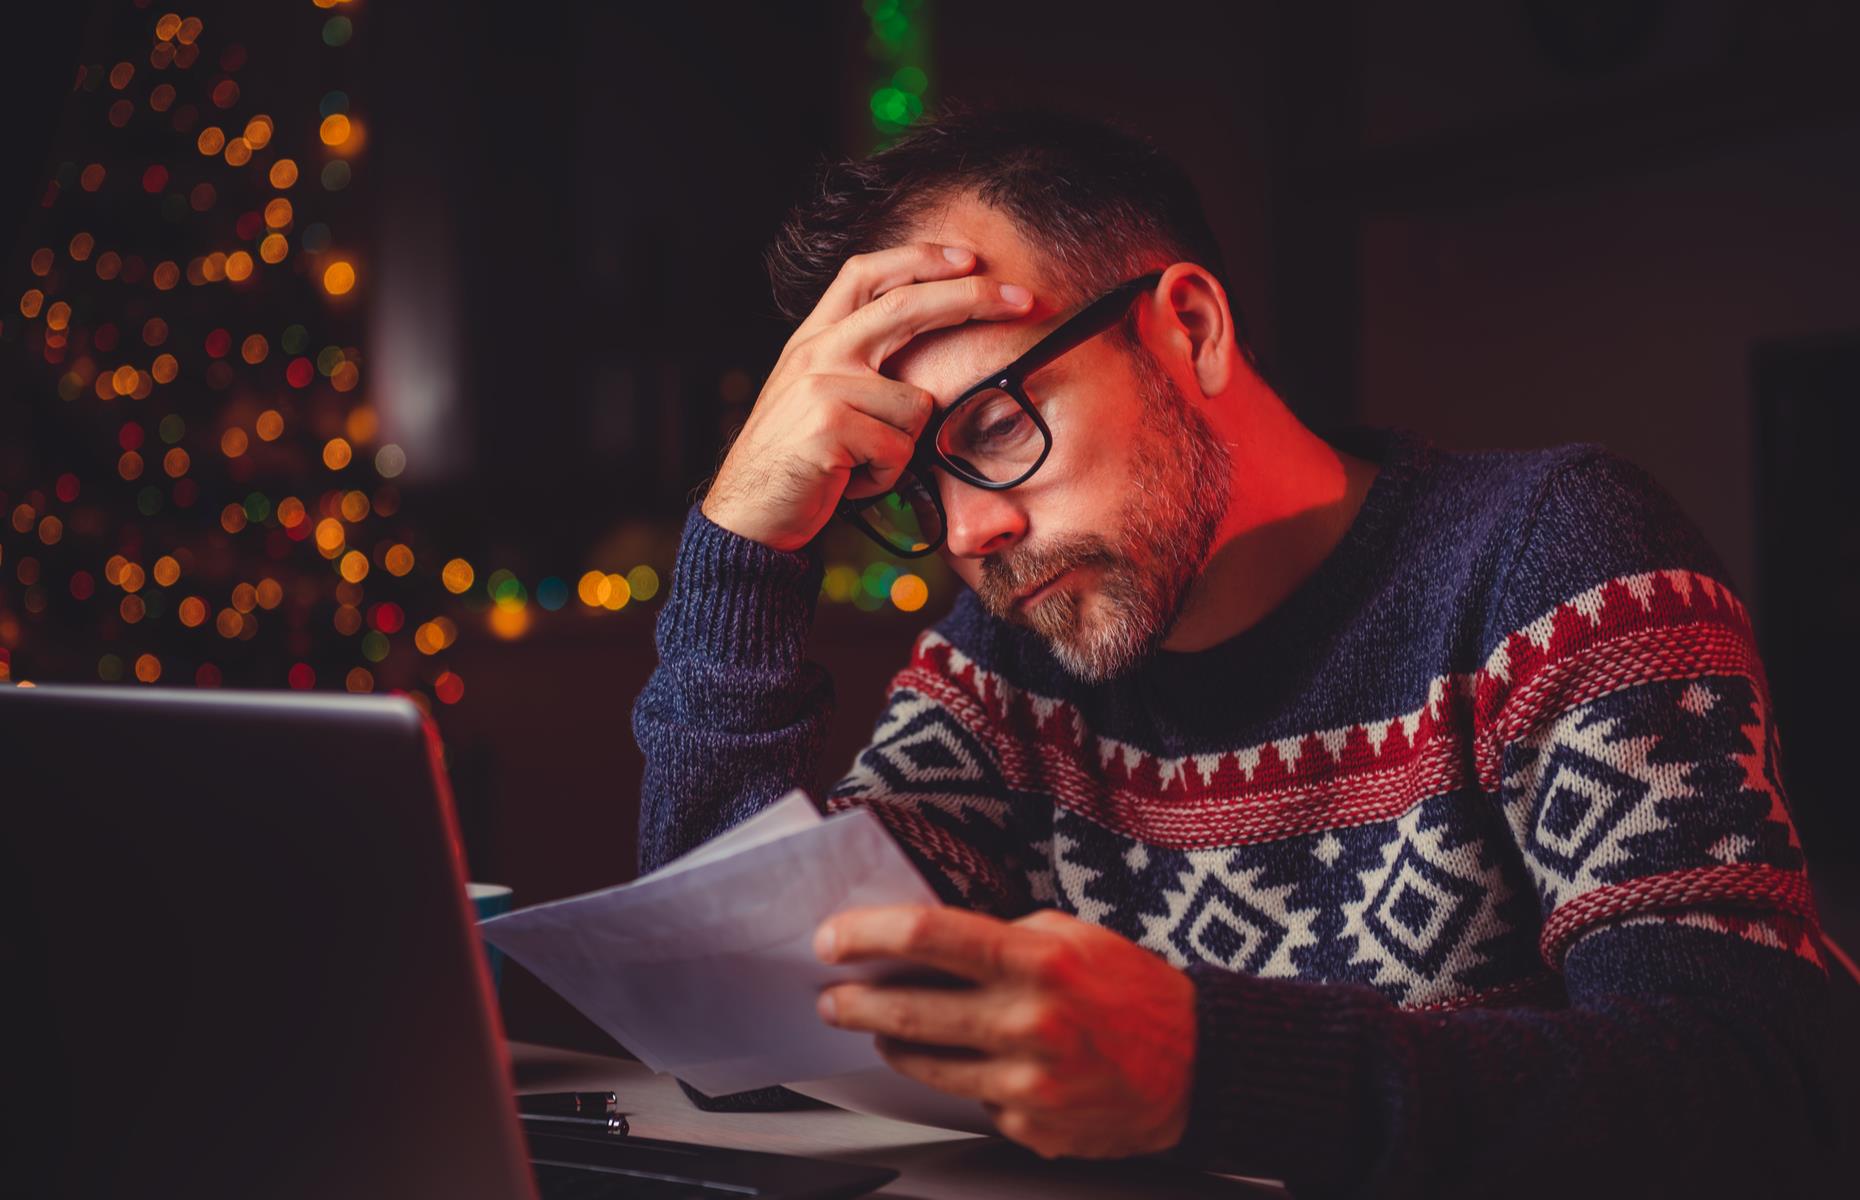 1 in 3 Americans are still paying off last year's holiday debt